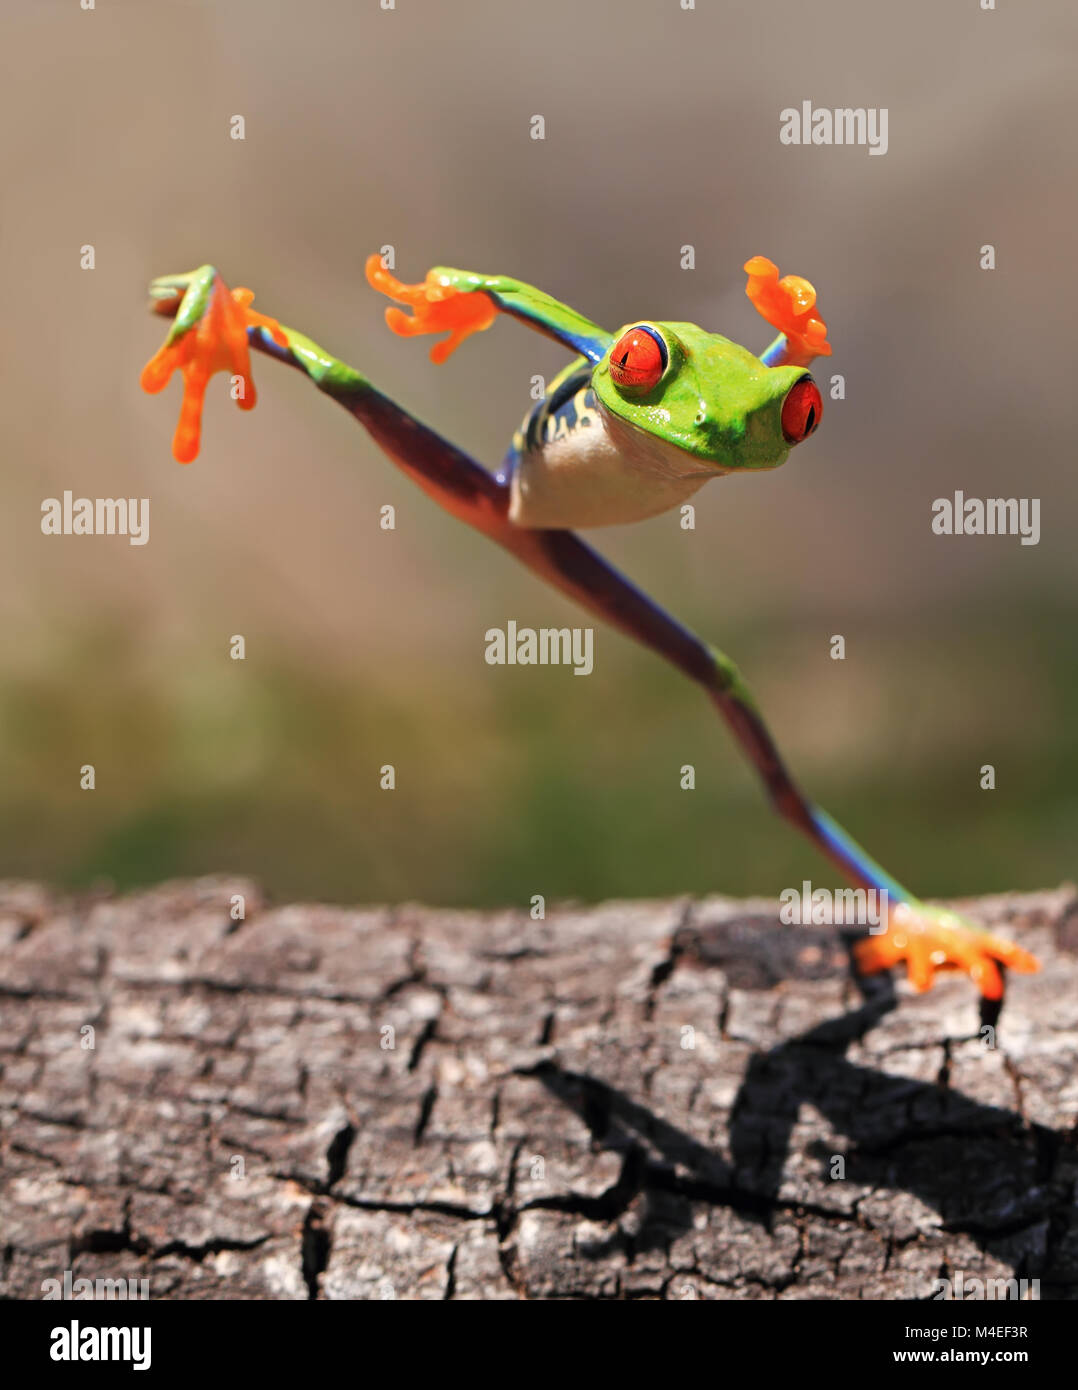 Tree Frog jumping, Indonesia Stock Photo